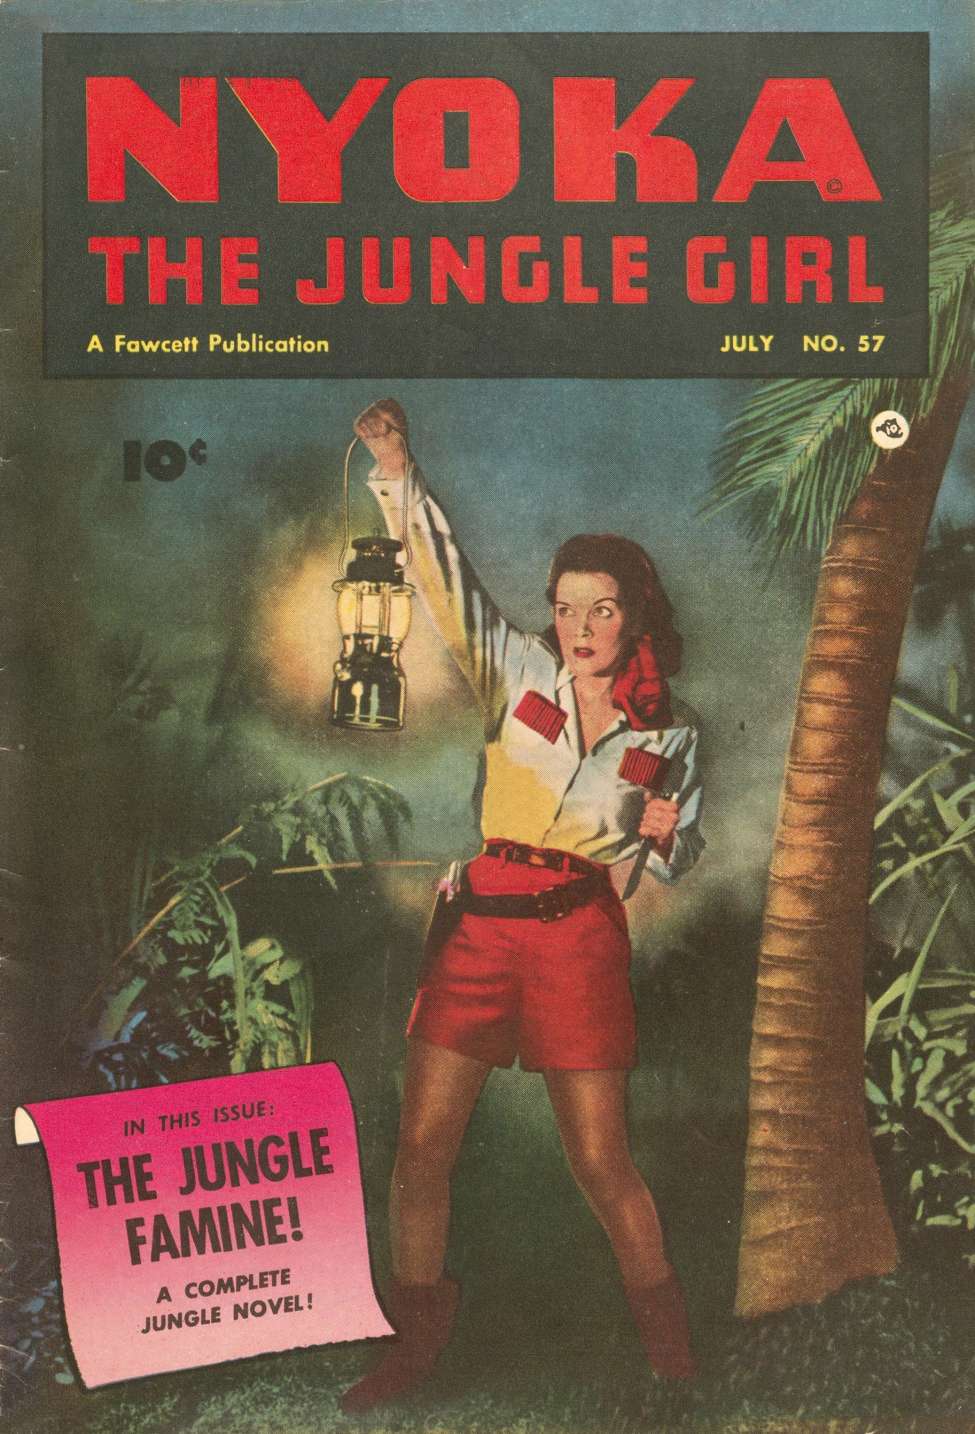 Book Cover For Nyoka the Jungle Girl 57 - Version 2